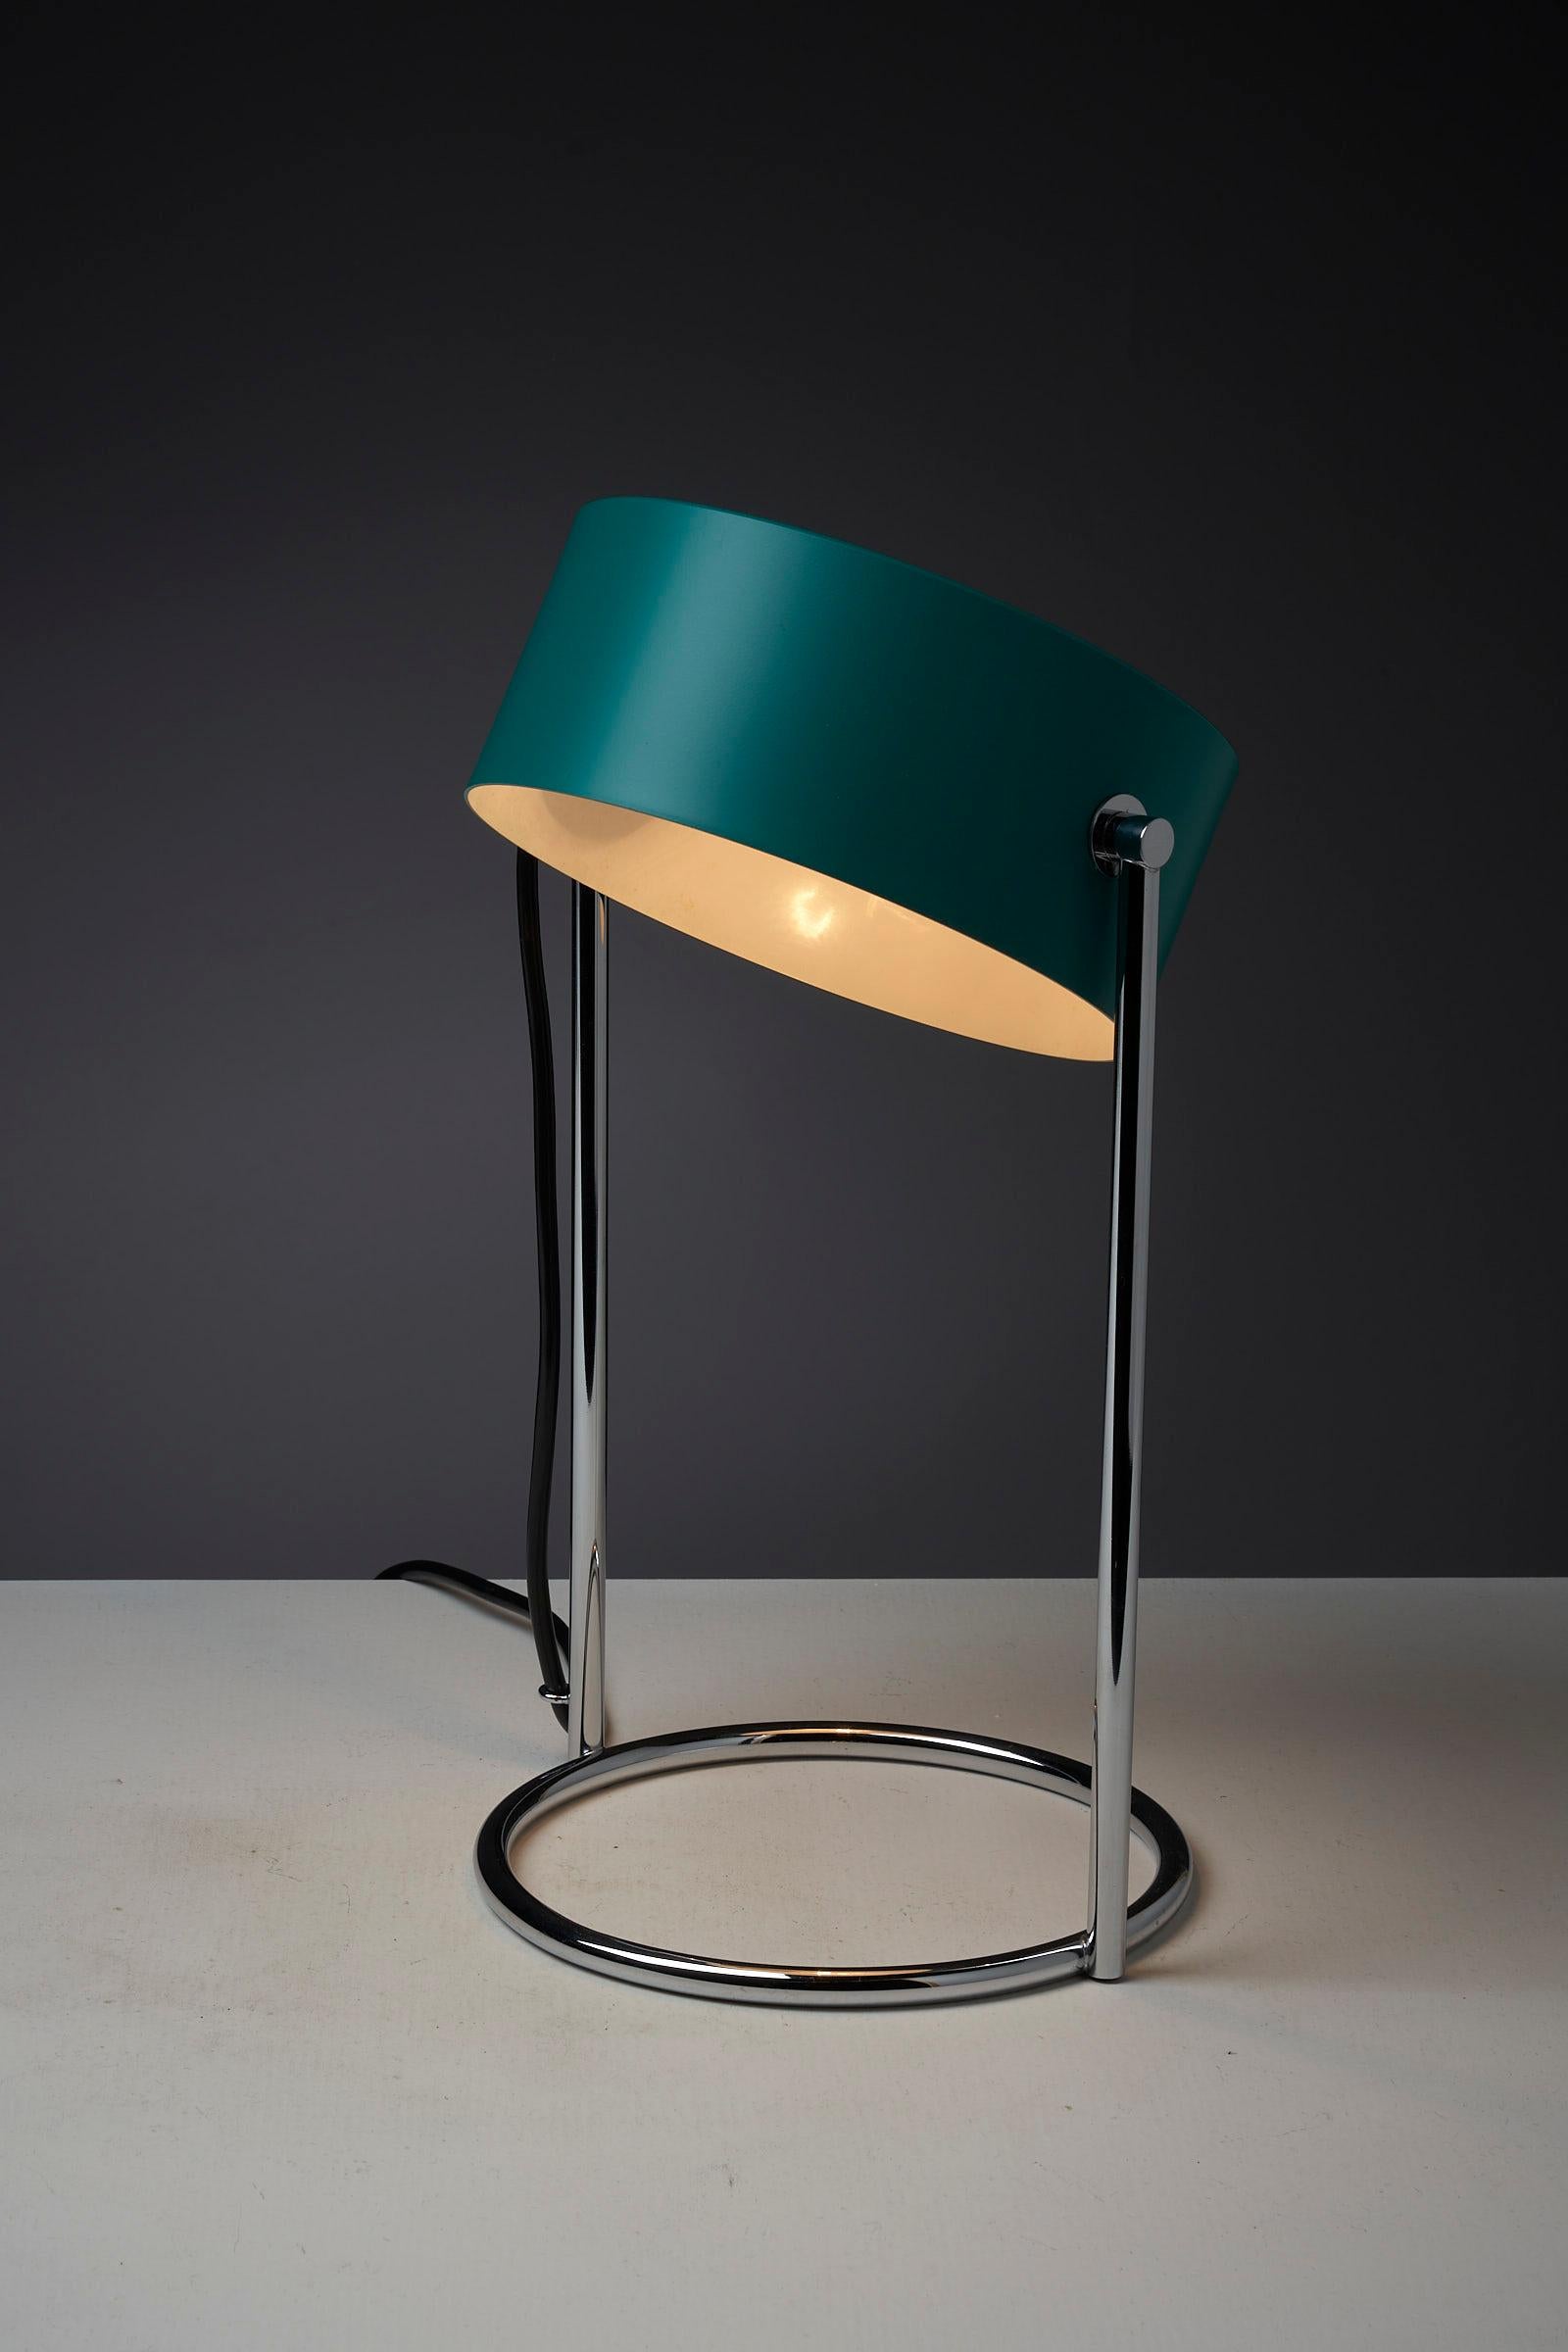 This is an elegant table lamp in stunning condition, featuring a petrol green shade made of lacquered metal that is fully adjustable around its axis. The shade is complemented by a chromed metal base, which perfectly matches its color and style. The